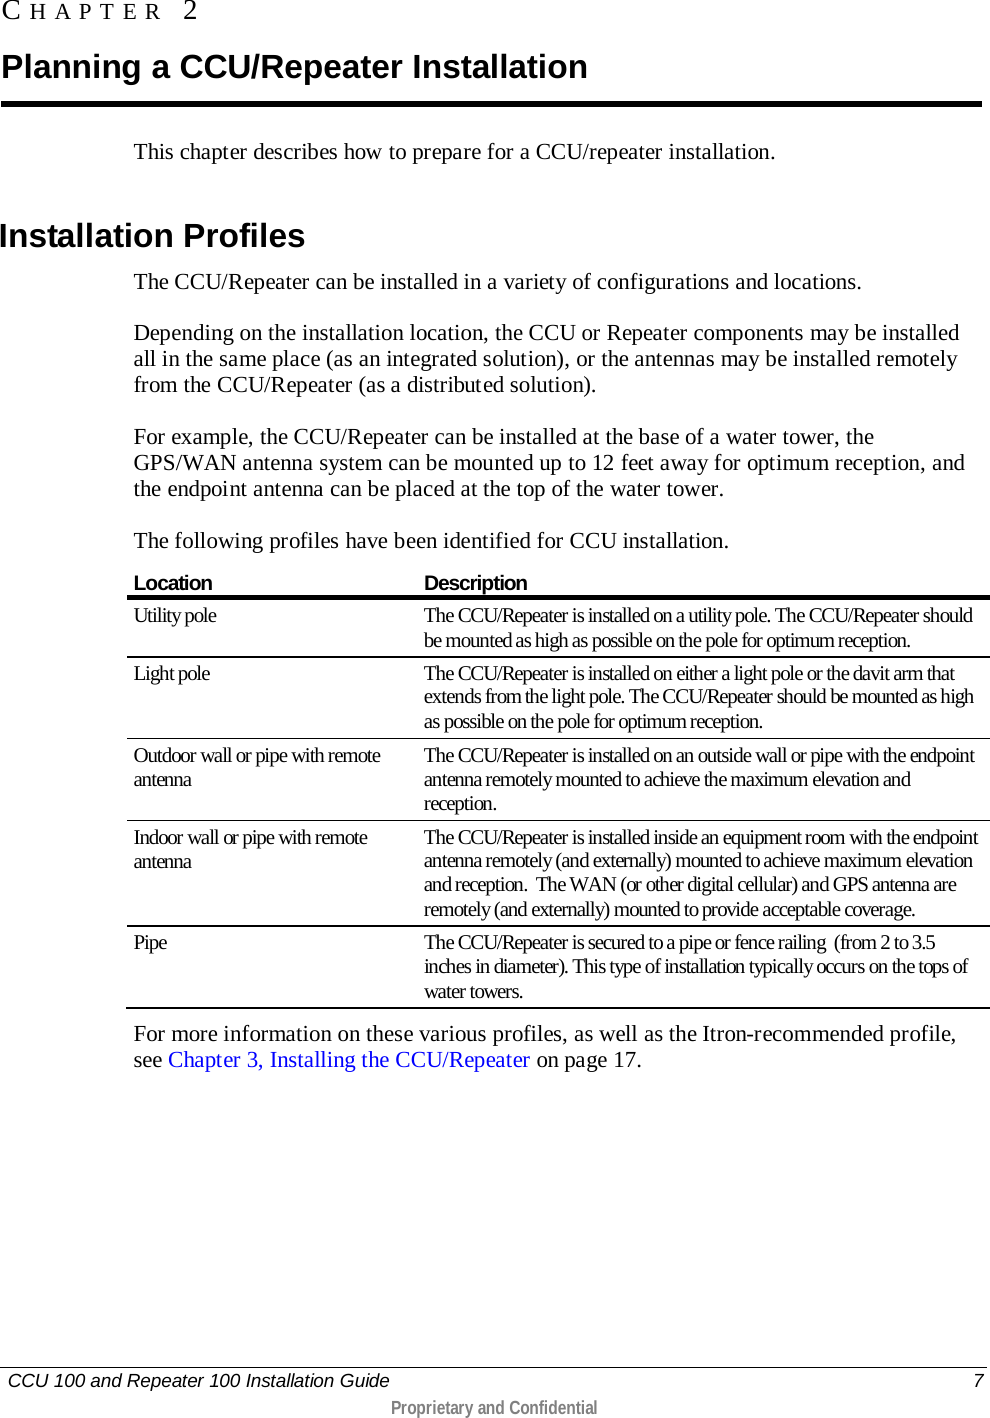   CCU 100 and Repeater 100 Installation Guide    7  Proprietary and Confidential  This chapter describes how to prepare for a CCU/repeater installation.   Installation Profiles The CCU/Repeater can be installed in a variety of configurations and locations.  Depending on the installation location, the CCU or Repeater components may be installed all in the same place (as an integrated solution), or the antennas may be installed remotely from the CCU/Repeater (as a distributed solution).  For example, the CCU/Repeater can be installed at the base of a water tower, the GPS/WAN antenna system can be mounted up to 12 feet away for optimum reception, and the endpoint antenna can be placed at the top of the water tower.  The following profiles have been identified for CCU installation.  Location Description Utility pole The CCU/Repeater is installed on a utility pole. The CCU/Repeater should be mounted as high as possible on the pole for optimum reception.  Light pole The CCU/Repeater is installed on either a light pole or the davit arm that extends from the light pole. The CCU/Repeater should be mounted as high as possible on the pole for optimum reception.  Outdoor wall or pipe with remote antenna The CCU/Repeater is installed on an outside wall or pipe with the endpoint antenna remotely mounted to achieve the maximum elevation and reception. Indoor wall or pipe with remote antenna The CCU/Repeater is installed inside an equipment room with the endpoint antenna remotely (and externally) mounted to achieve maximum elevation and reception.  The WAN (or other digital cellular) and GPS antenna are remotely (and externally) mounted to provide acceptable coverage. Pipe The CCU/Repeater is secured to a pipe or fence railing  (from 2 to 3.5 inches in diameter). This type of installation typically occurs on the tops of water towers. For more information on these various profiles, as well as the Itron-recommended profile, see Chapter 3, Installing the CCU/Repeater on page 17. CHAPTER 2  Planning a CCU/Repeater Installation 